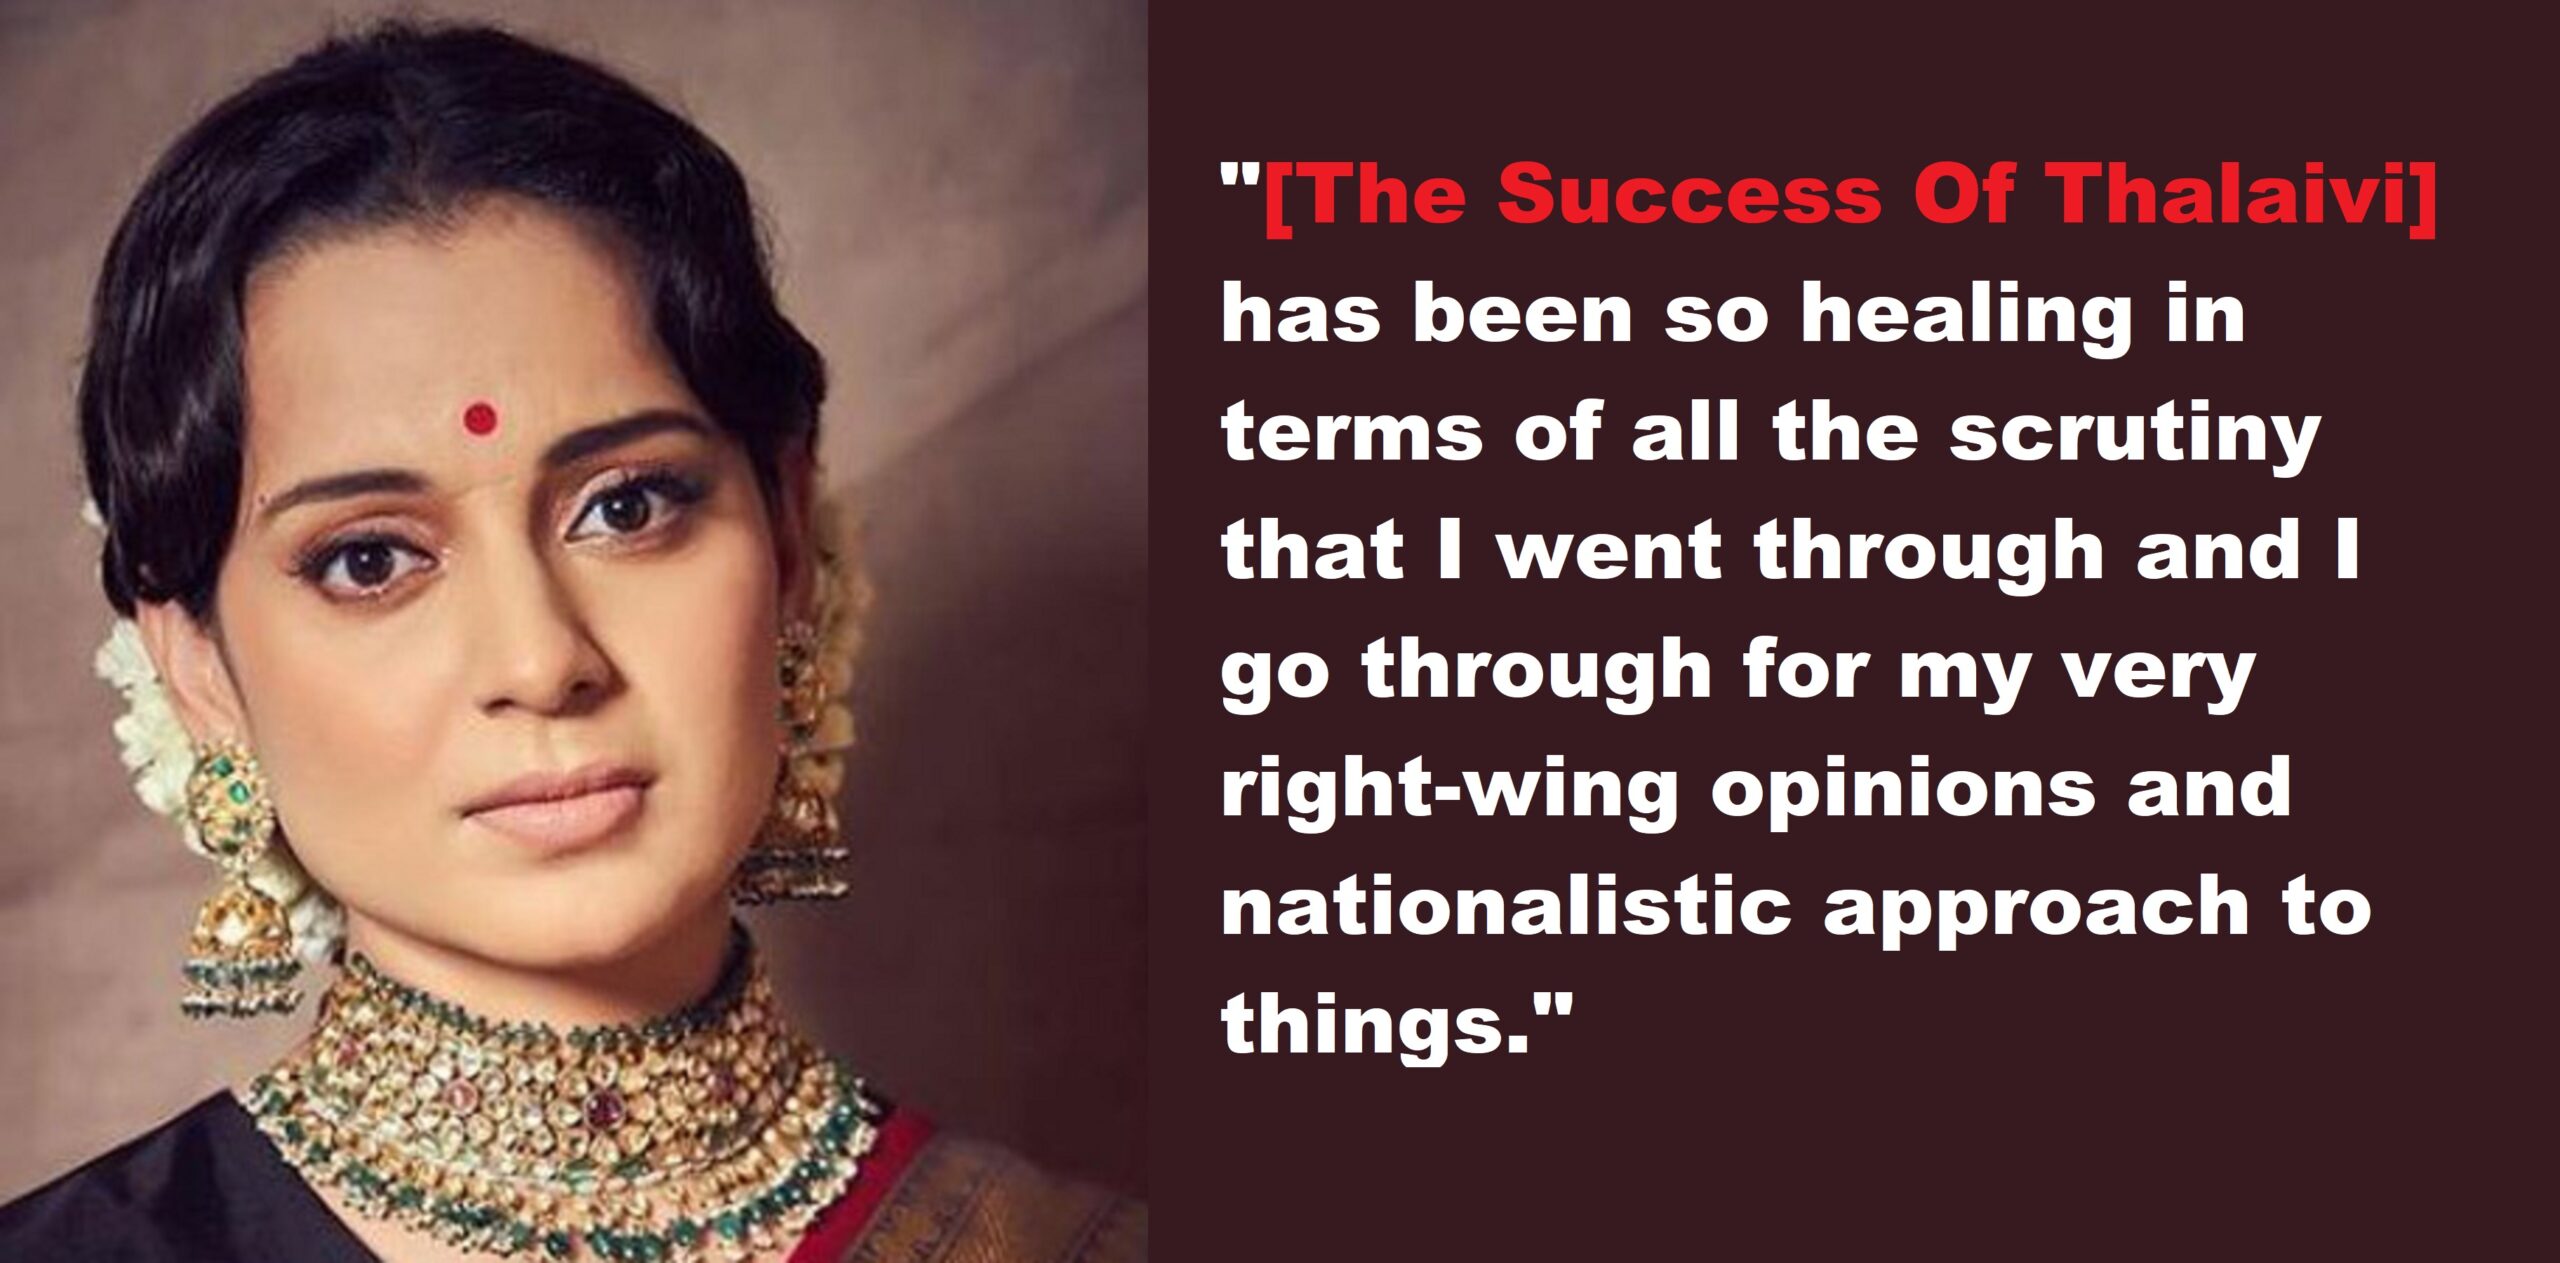 Kangana Ranaut Speaks On The Success Of Thalaivi: ‘It Has Been Healing After All The Scrutiny’